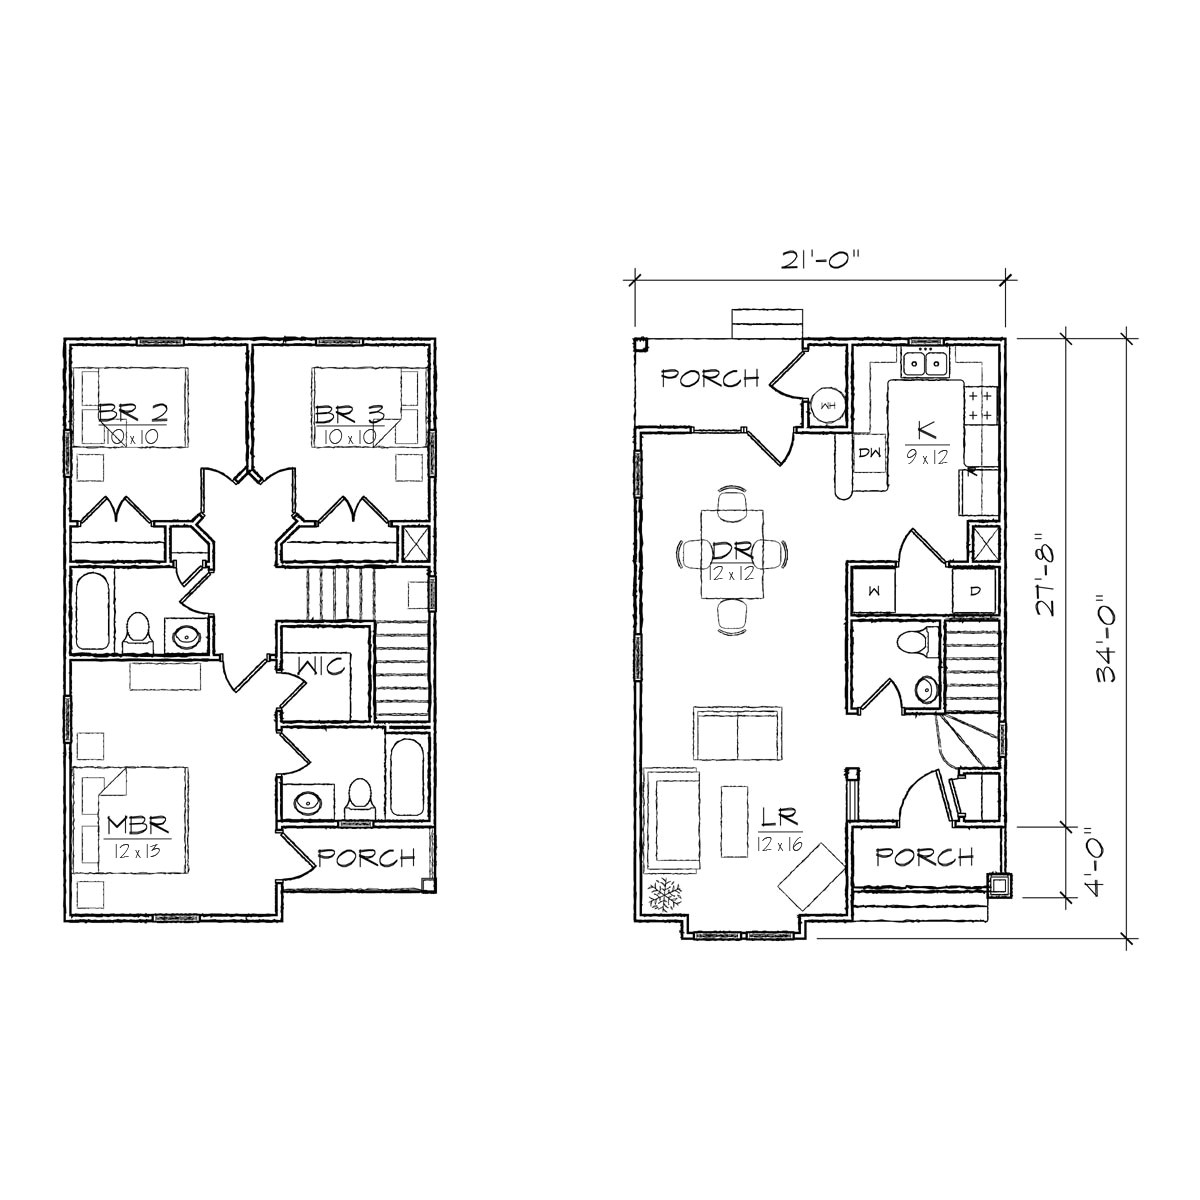 House Plans for A Small Lot Small Lot House Plans Narrow Lot Home Deco Plans